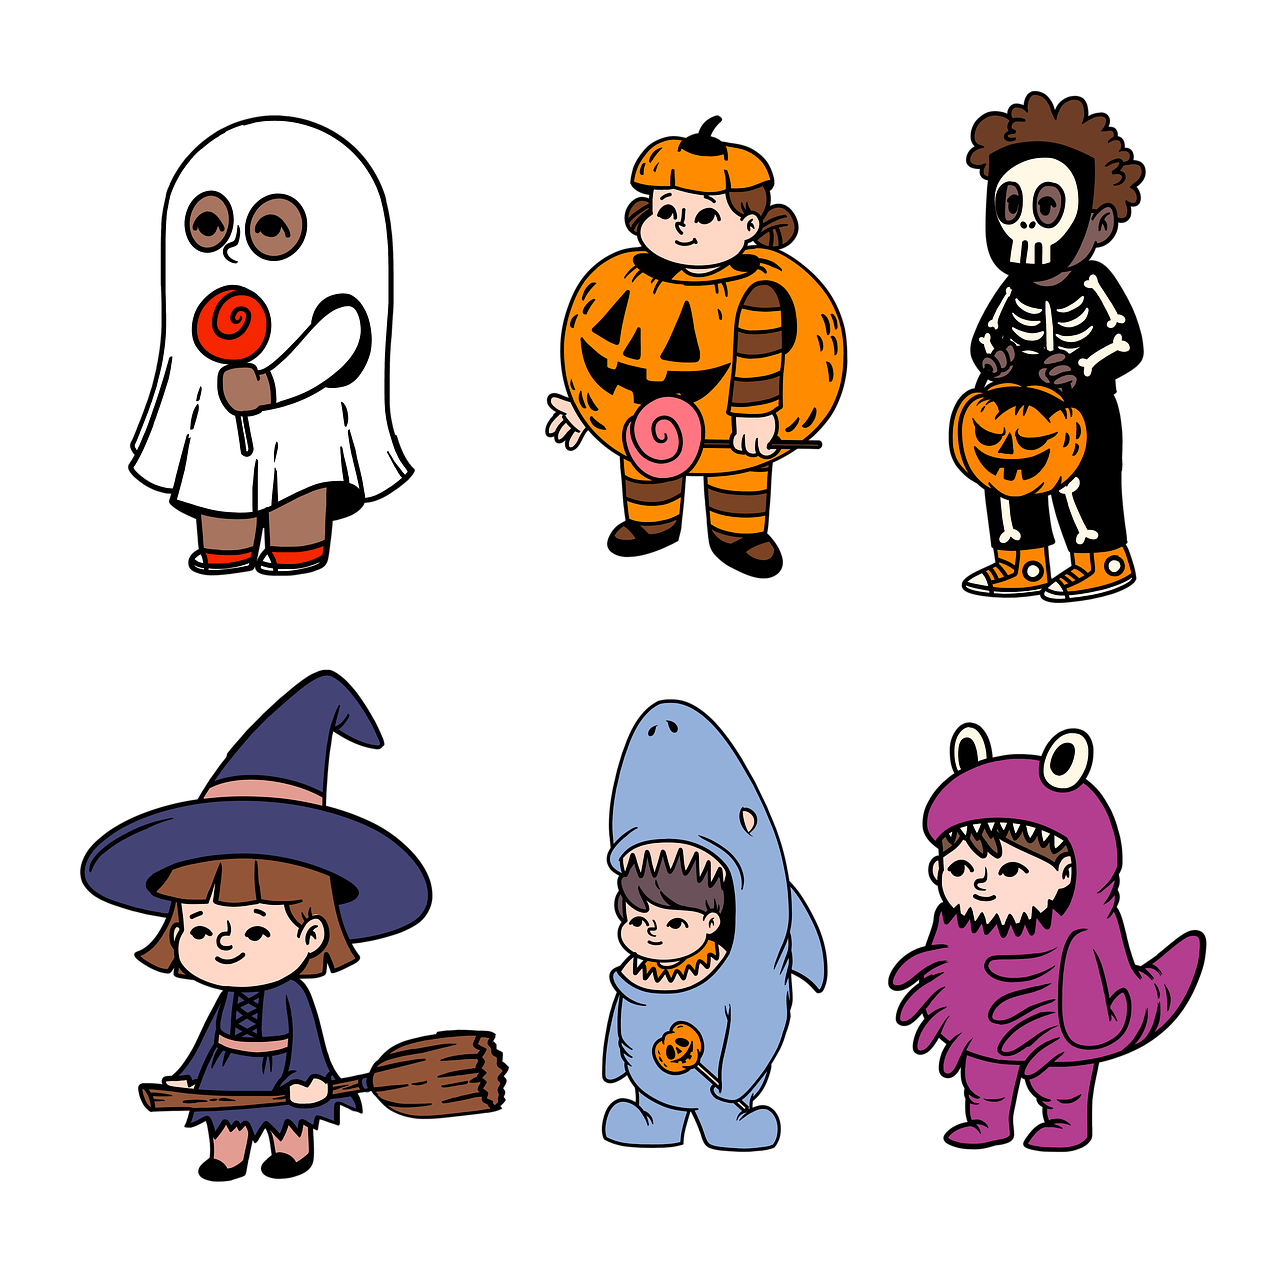 children in halloween costumes - ghost, jack-o-lantern, skeleton, witch, shark, and a dinosaur-like monster